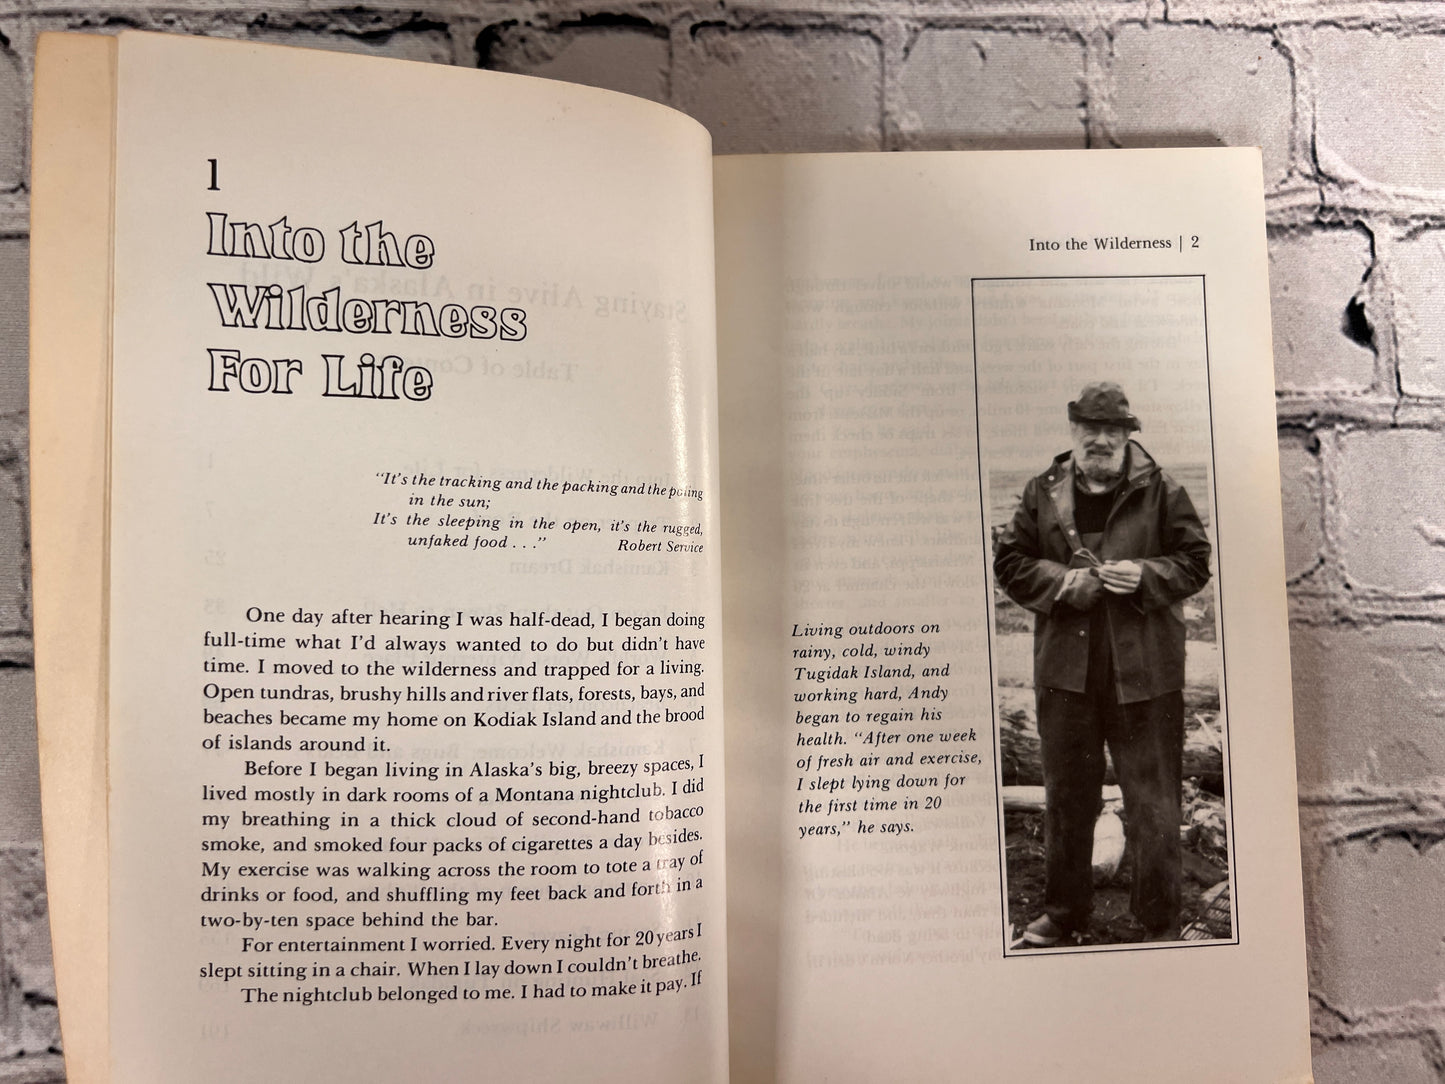 Staying Alive in Alaska's Wild by Andy Nault True Adventures [1980 · SIGNED]